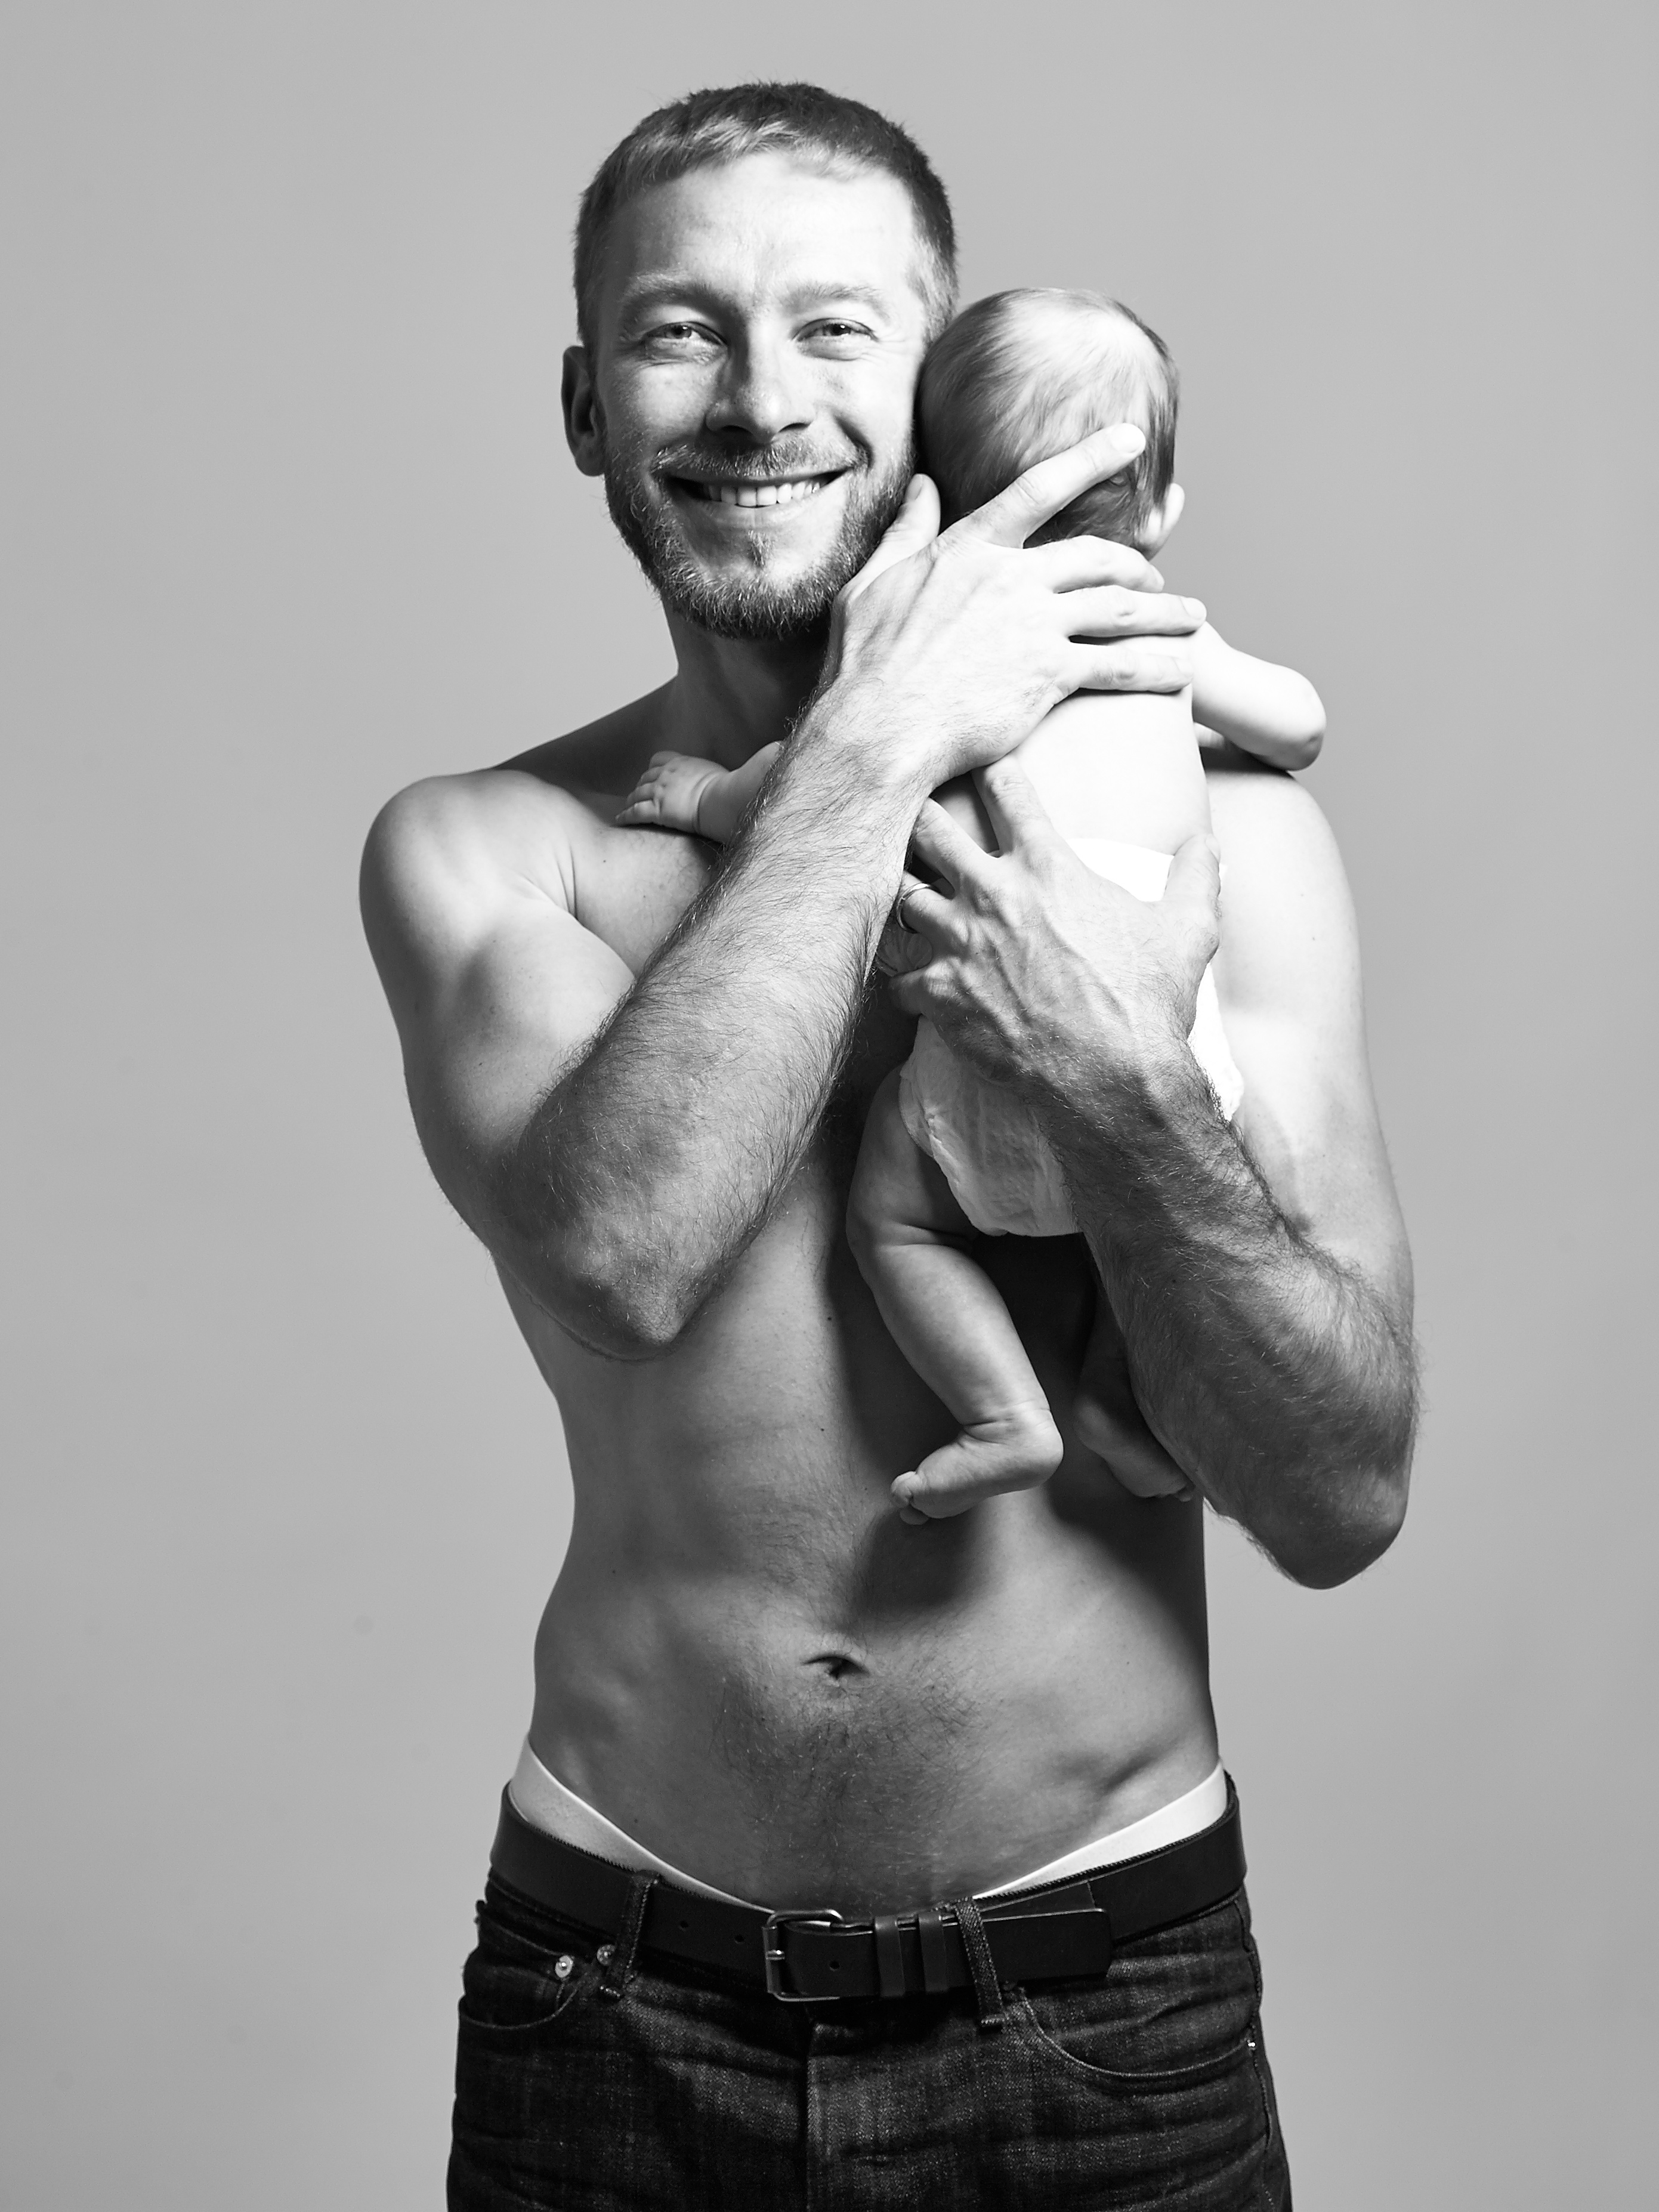 Cool guy with beard and smiling with naked upper body lovingly holding his baby daughter